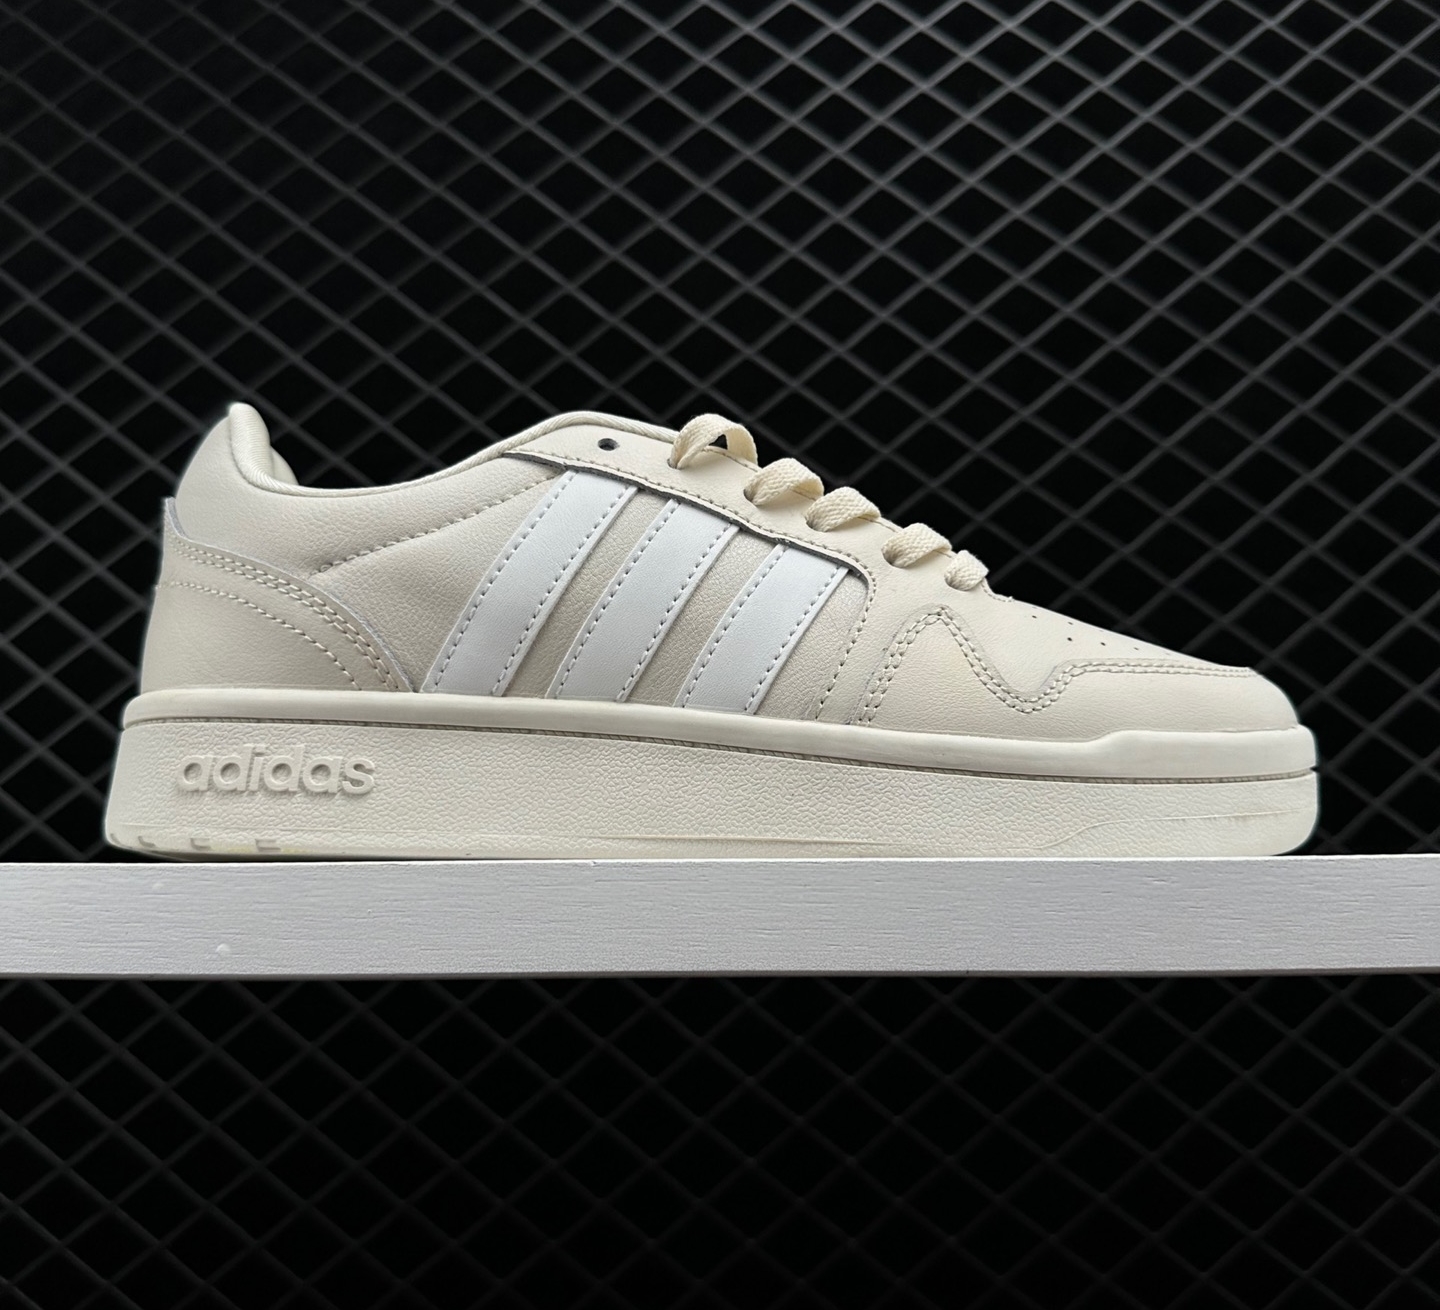 Adidas Postmove Casual Shoes in Triple White - H00465